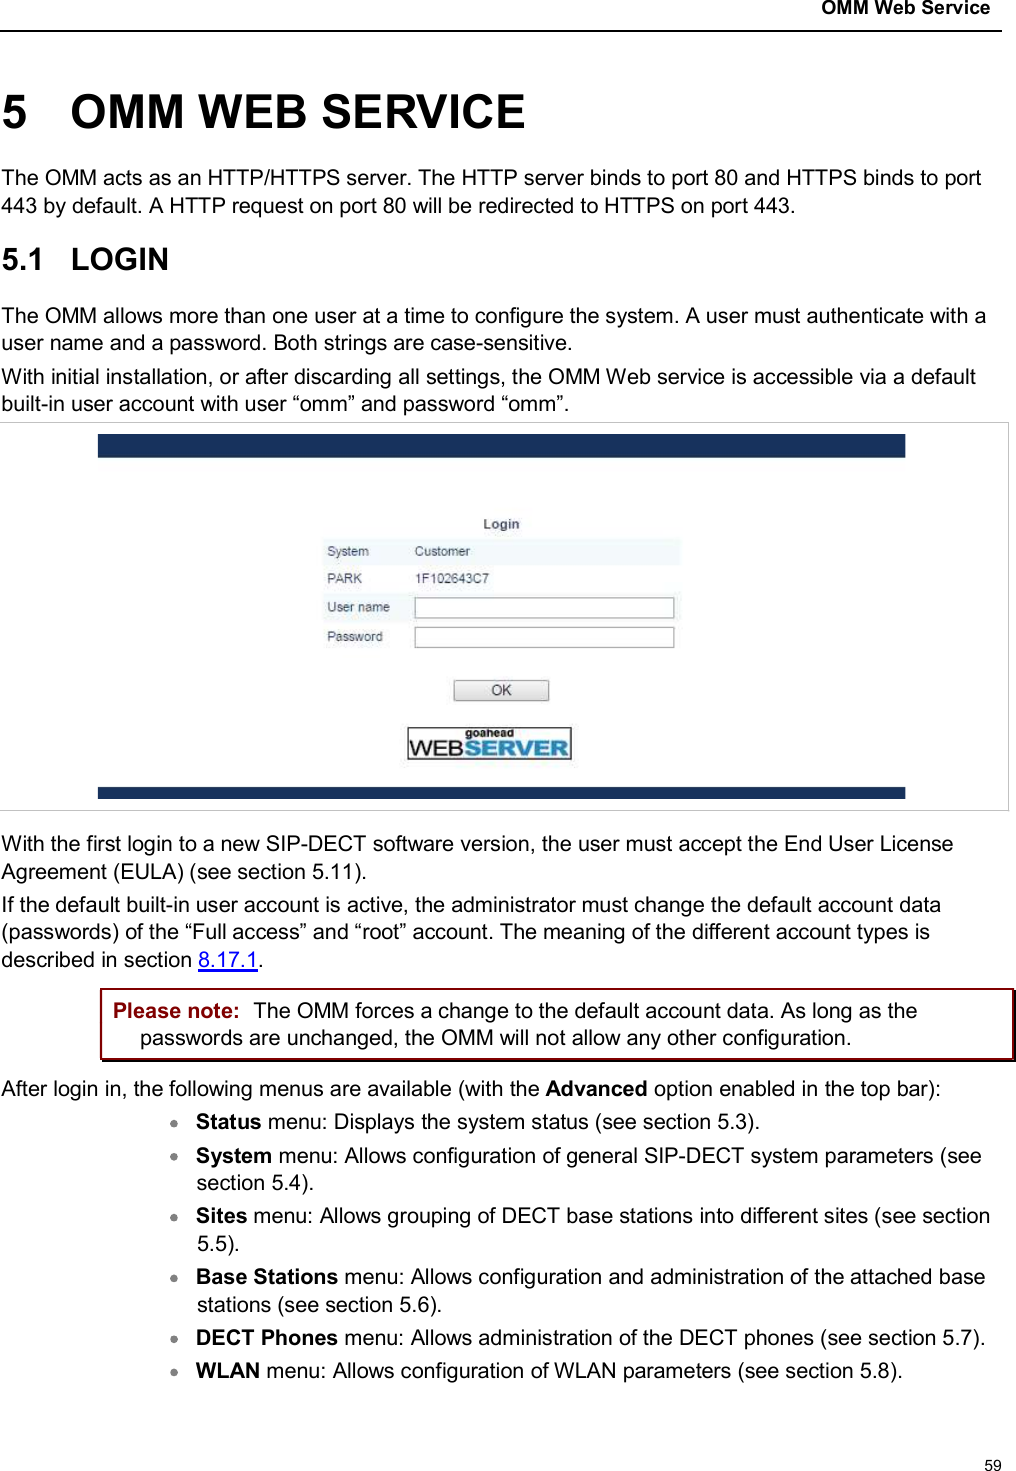 OMM Web Service595 OMM WEB SERVICEThe OMM acts as an HTTP/HTTPS server. The HTTP server binds to port 80 and HTTPS binds to port 443 by default. A HTTP request on port 80 will be redirected to HTTPS on port 443.5.1 LOGINThe OMM allows more than one user at a time to configure the system. A user must authenticate with a user name and a password. Both strings are case-sensitive.With initial installation, or after discarding all settings, the OMM Web service is accessible via a default built-in user account with user “omm” and password “omm”.With the first login to a new SIP-DECT software version, the user must accept the End User License Agreement (EULA) (see section 5.11).If the default built-in user account is active, the administrator must change the default account data (passwords) of the “Full access” and “root” account. The meaning of the different account types is described in section 8.17.1.Please note: The OMM forces a change to the default account data. As long as the passwords are unchanged, the OMM will not allow any other configuration.After login in, the following menus are available (with the Advanced option enabled in the top bar):Status menu: Displays the system status (see section 5.3).System menu: Allows configuration of general SIP-DECT system parameters (see section 5.4).Sites menu: Allows grouping of DECT base stations into different sites (see section5.5).Base Stations menu: Allows configuration and administration of the attached base stations (see section 5.6).DECT Phones menu: Allows administration of the DECT phones (see section 5.7).WLAN menu: Allows configuration of WLAN parameters (see section 5.8).